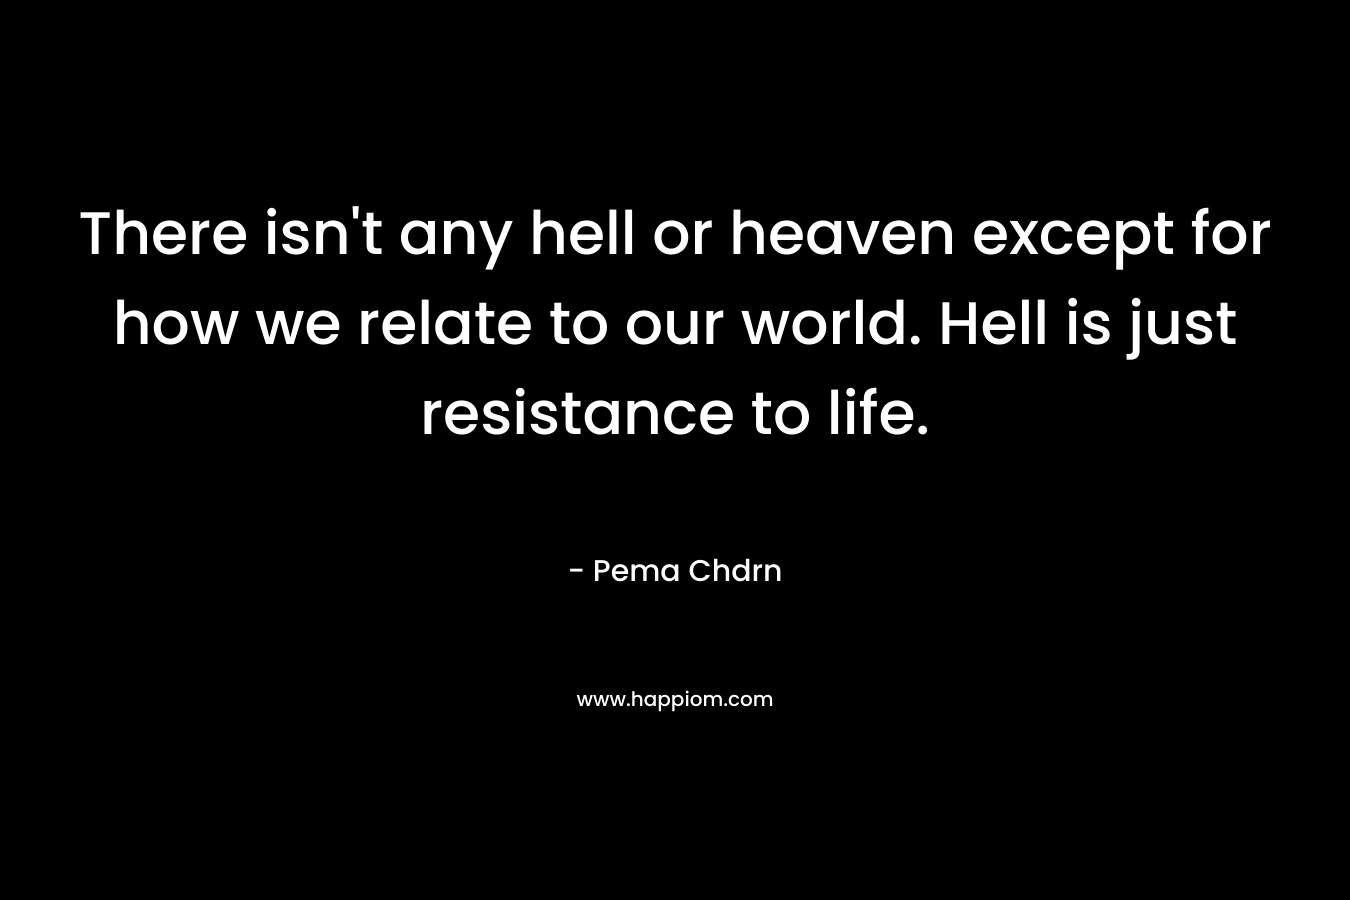 There isn't any hell or heaven except for how we relate to our world. Hell is just resistance to life.